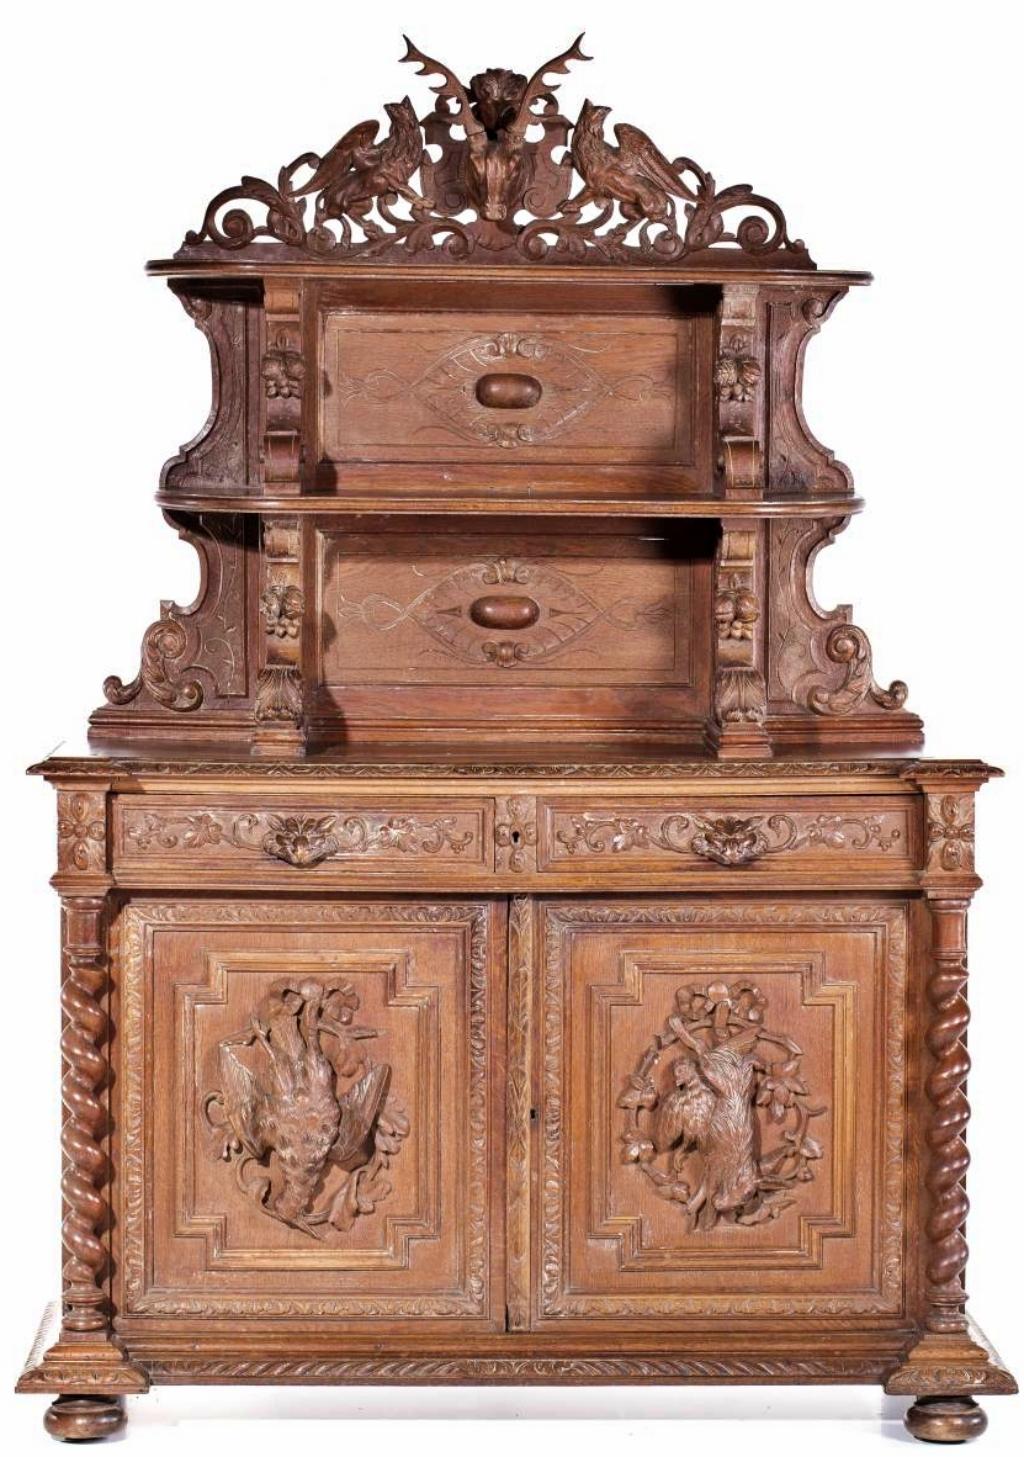 English sideboard Furniture Henry II
19th century
in carved oakwood.
With 2 shelves, 2 drawers and 2 doors.
Defects
Dimensions: 207 x 140 x 61 cm.